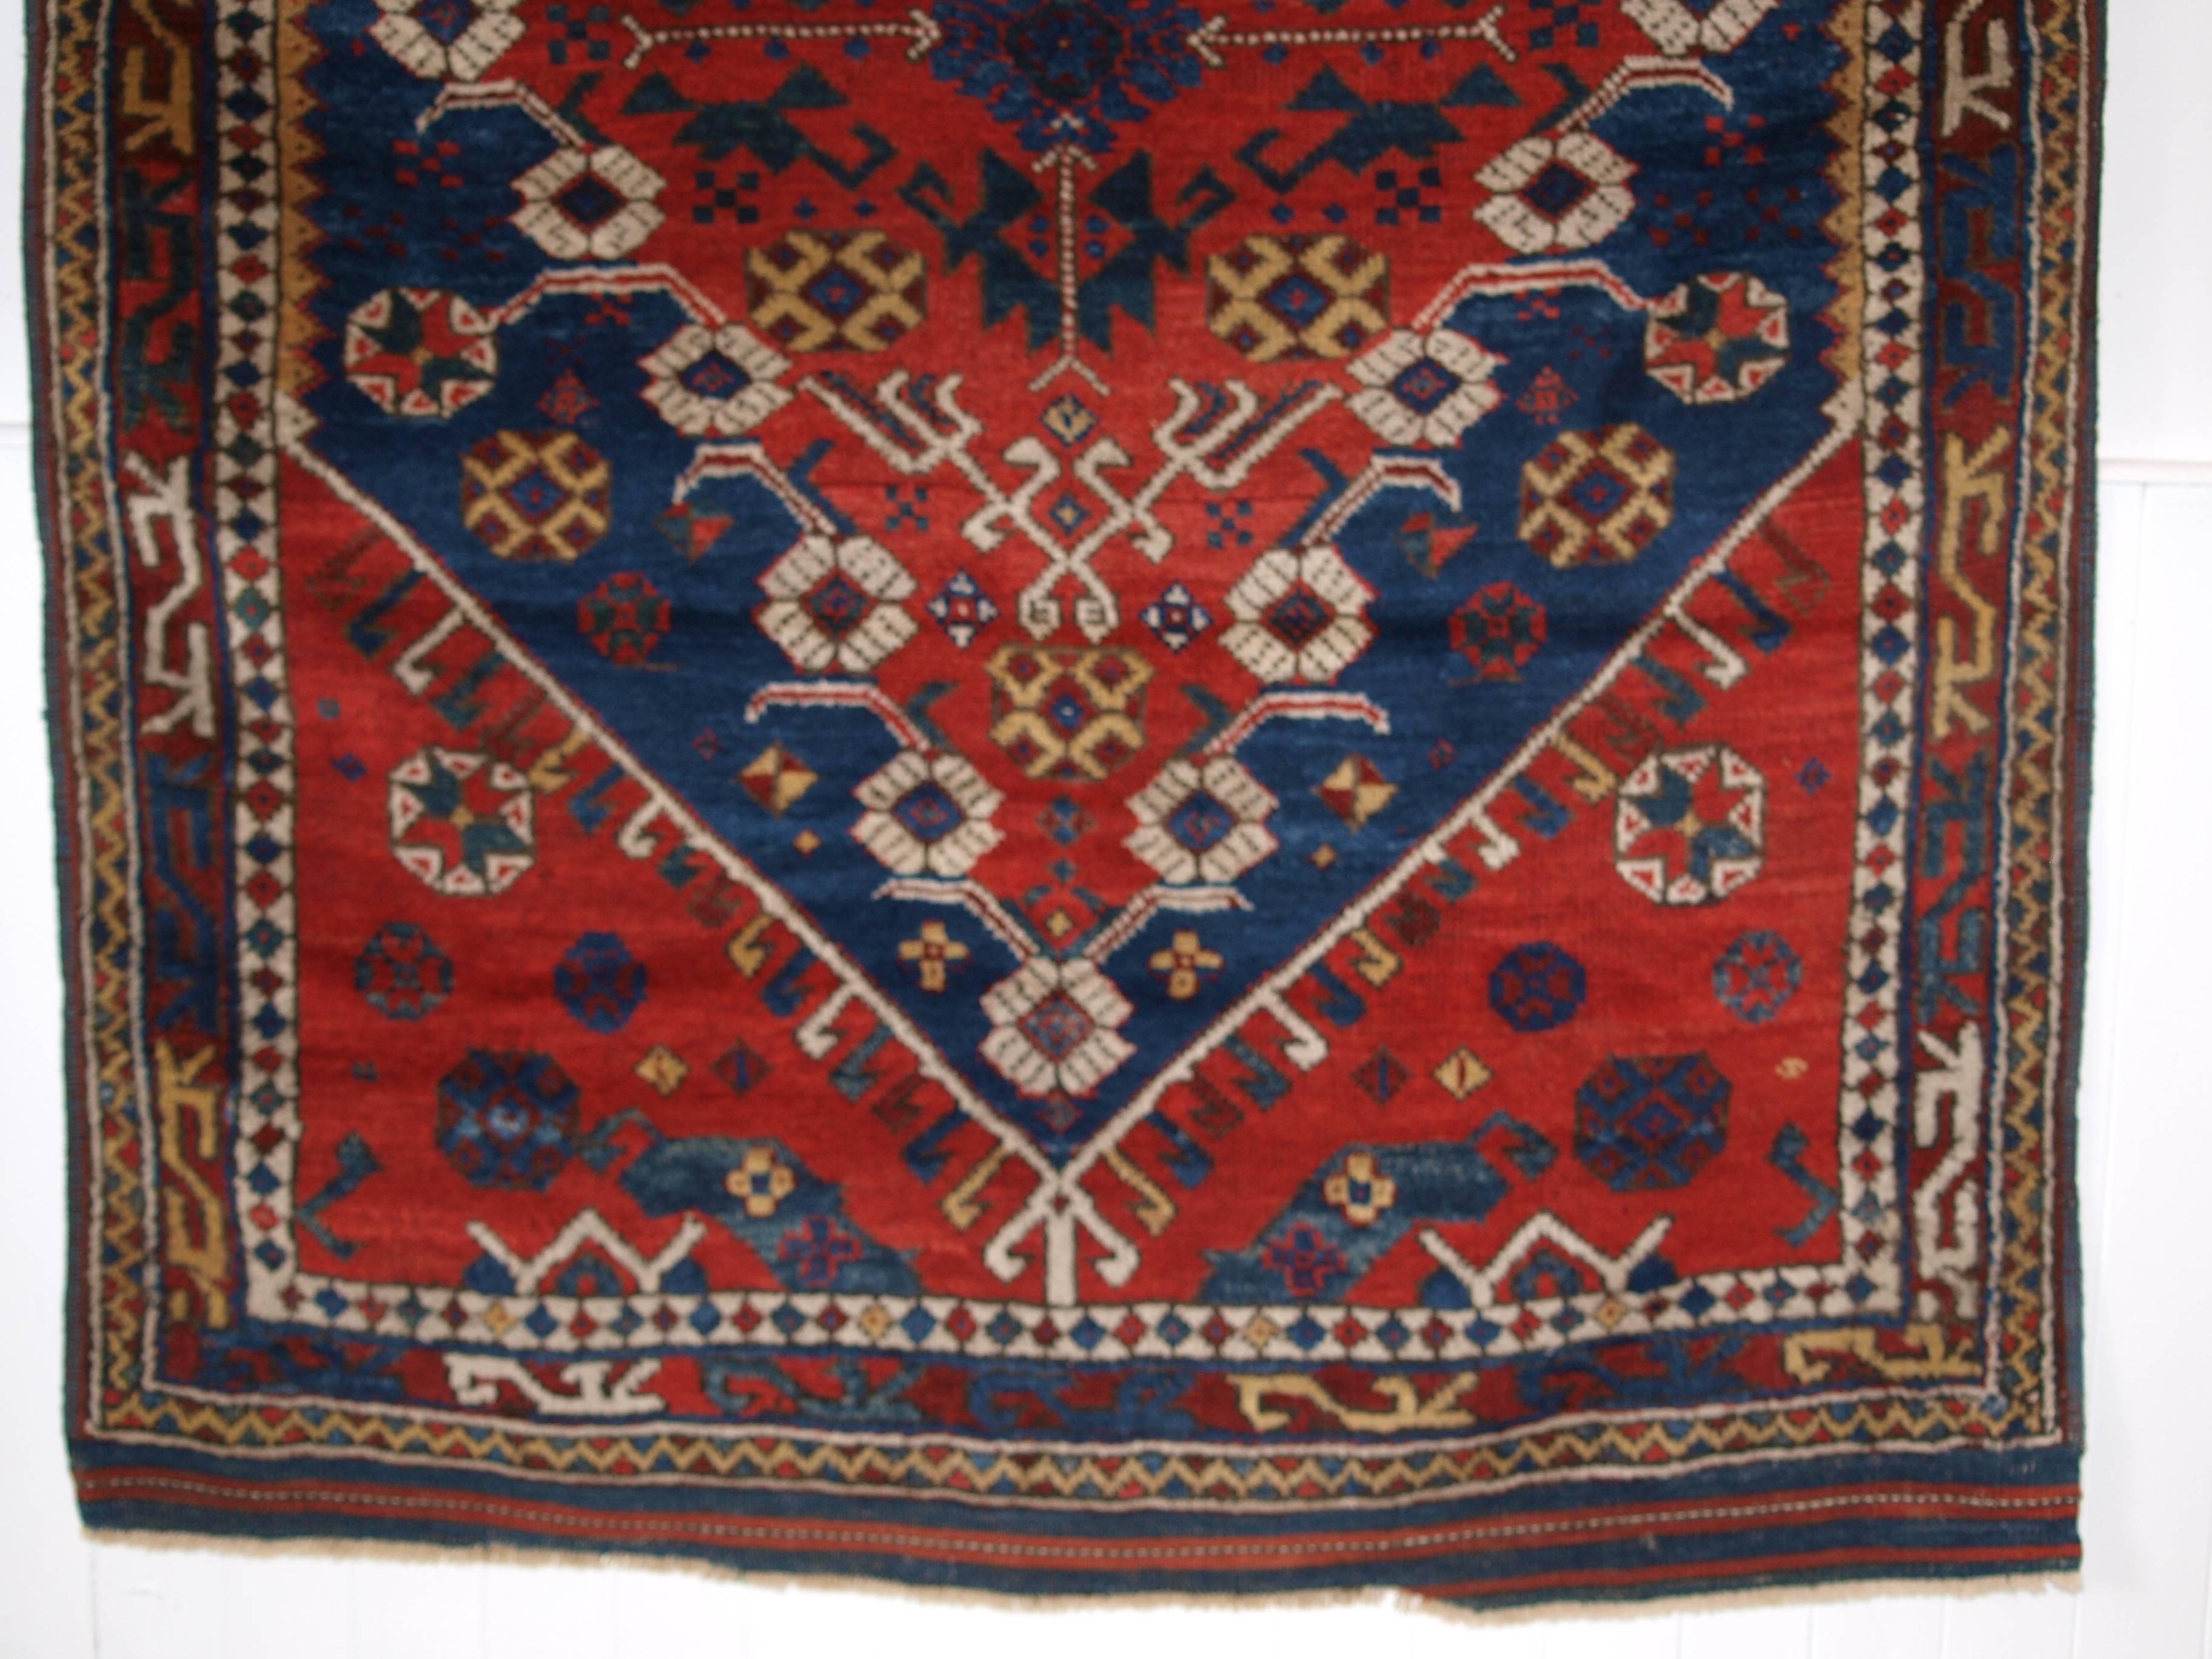 Antique Turkish Bergama Rug of Classic Design with Superb Color, circa 1880 In Excellent Condition For Sale In Moreton-in-Marsh, GB